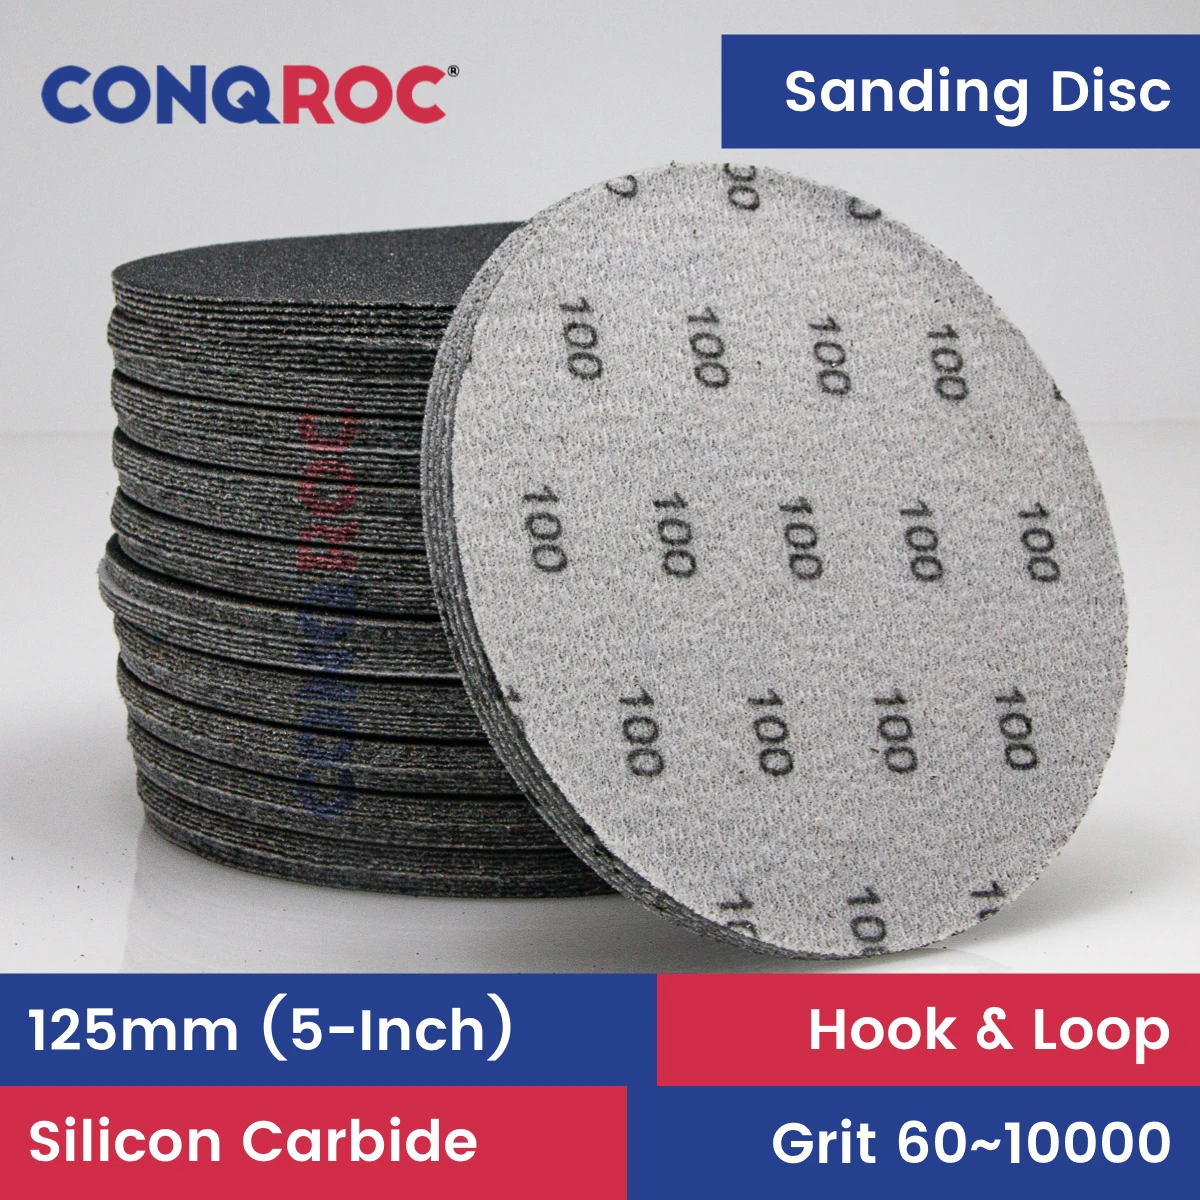 100 Pieces 5-Inch 125mm Silicon Carbide Sanding Discs Hook and Loop Waterproof for Wet and Dry Sanding Grit 60~10000